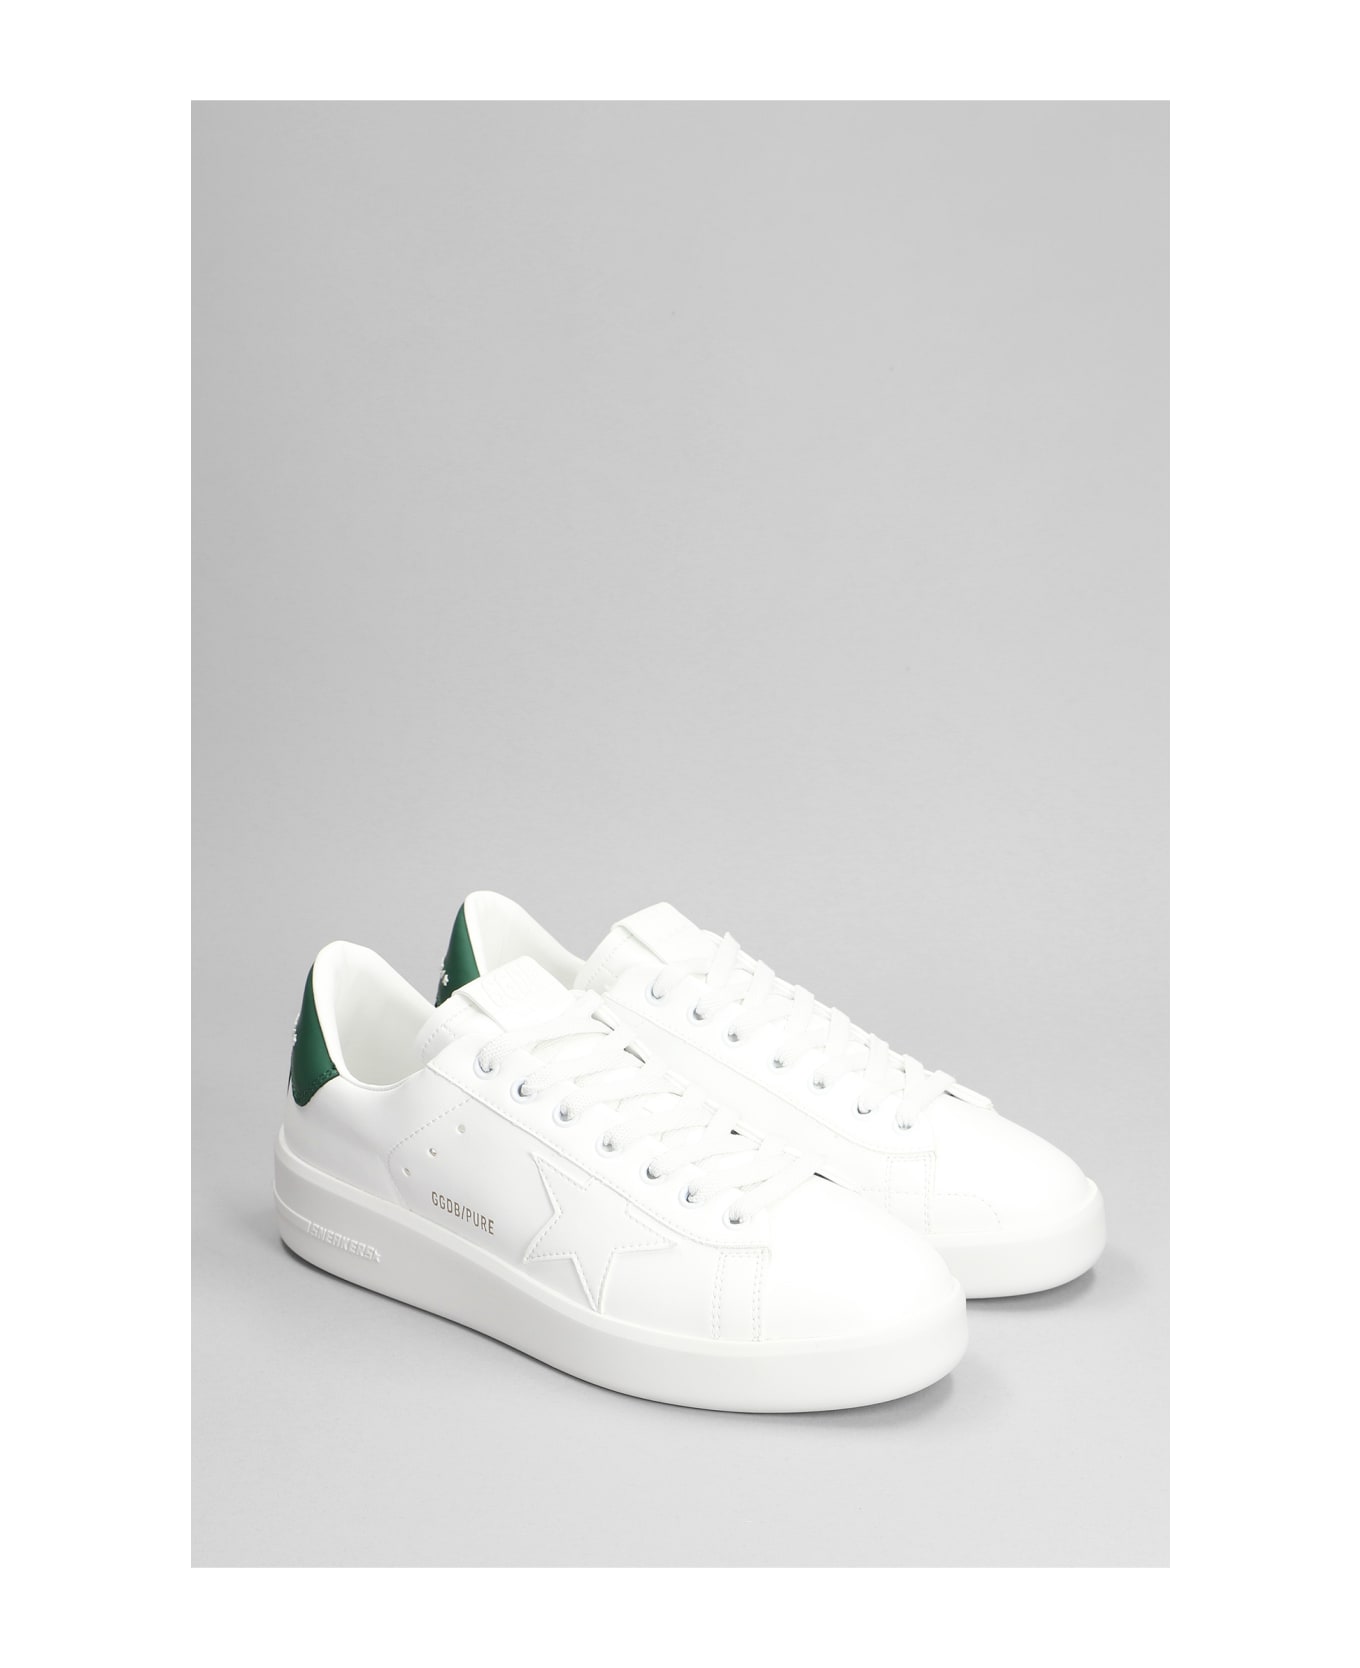 Golden Goose Pure Sneakers In White Leather - white